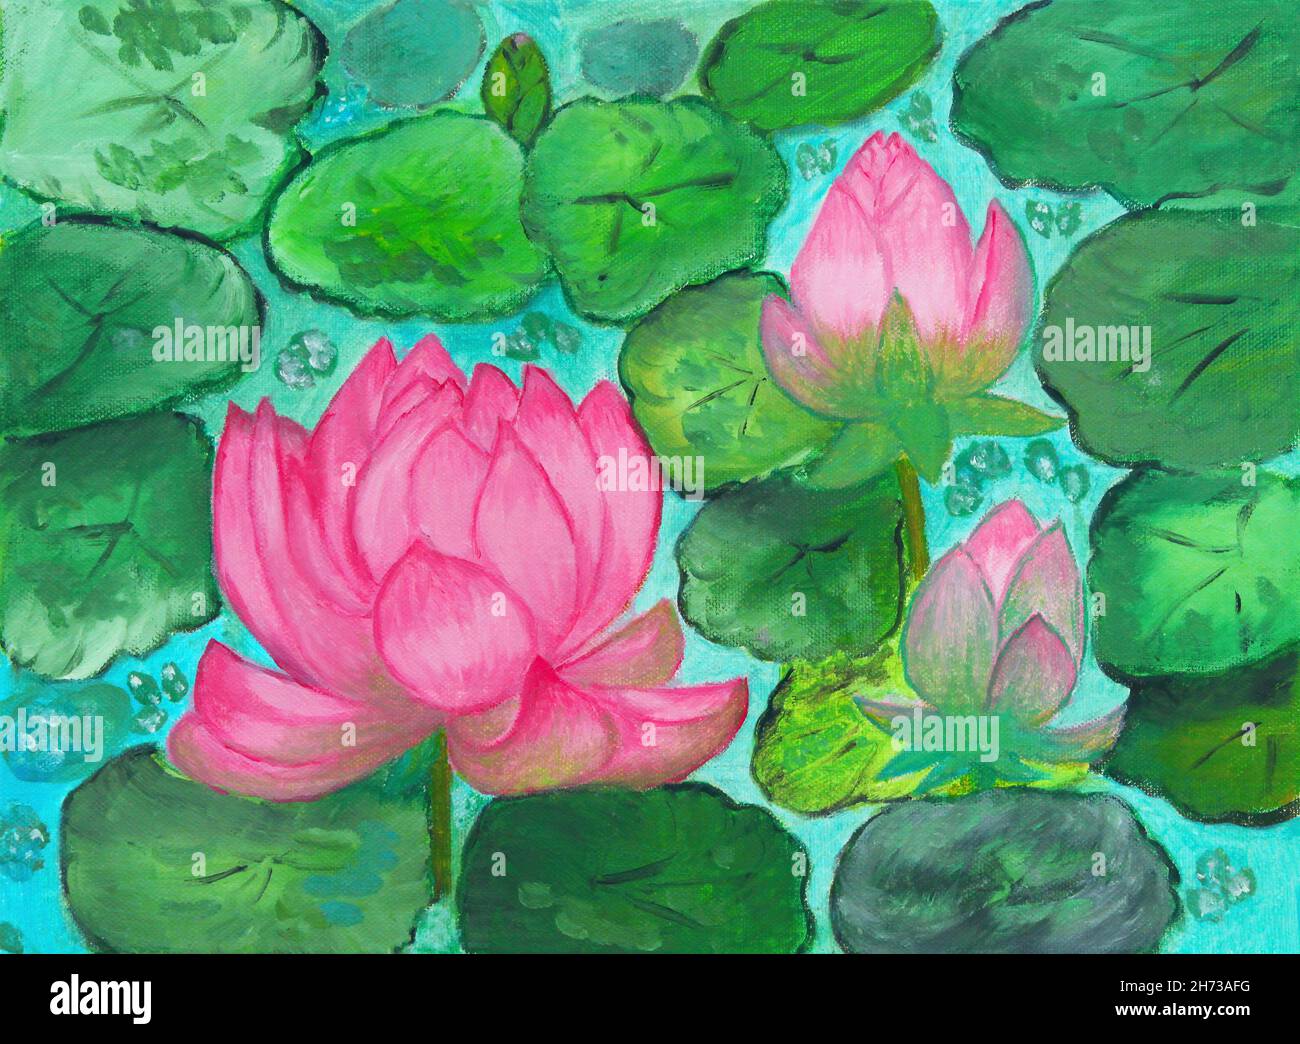 Oil painting on canvas of three pink water lilies in pond Stock Photo